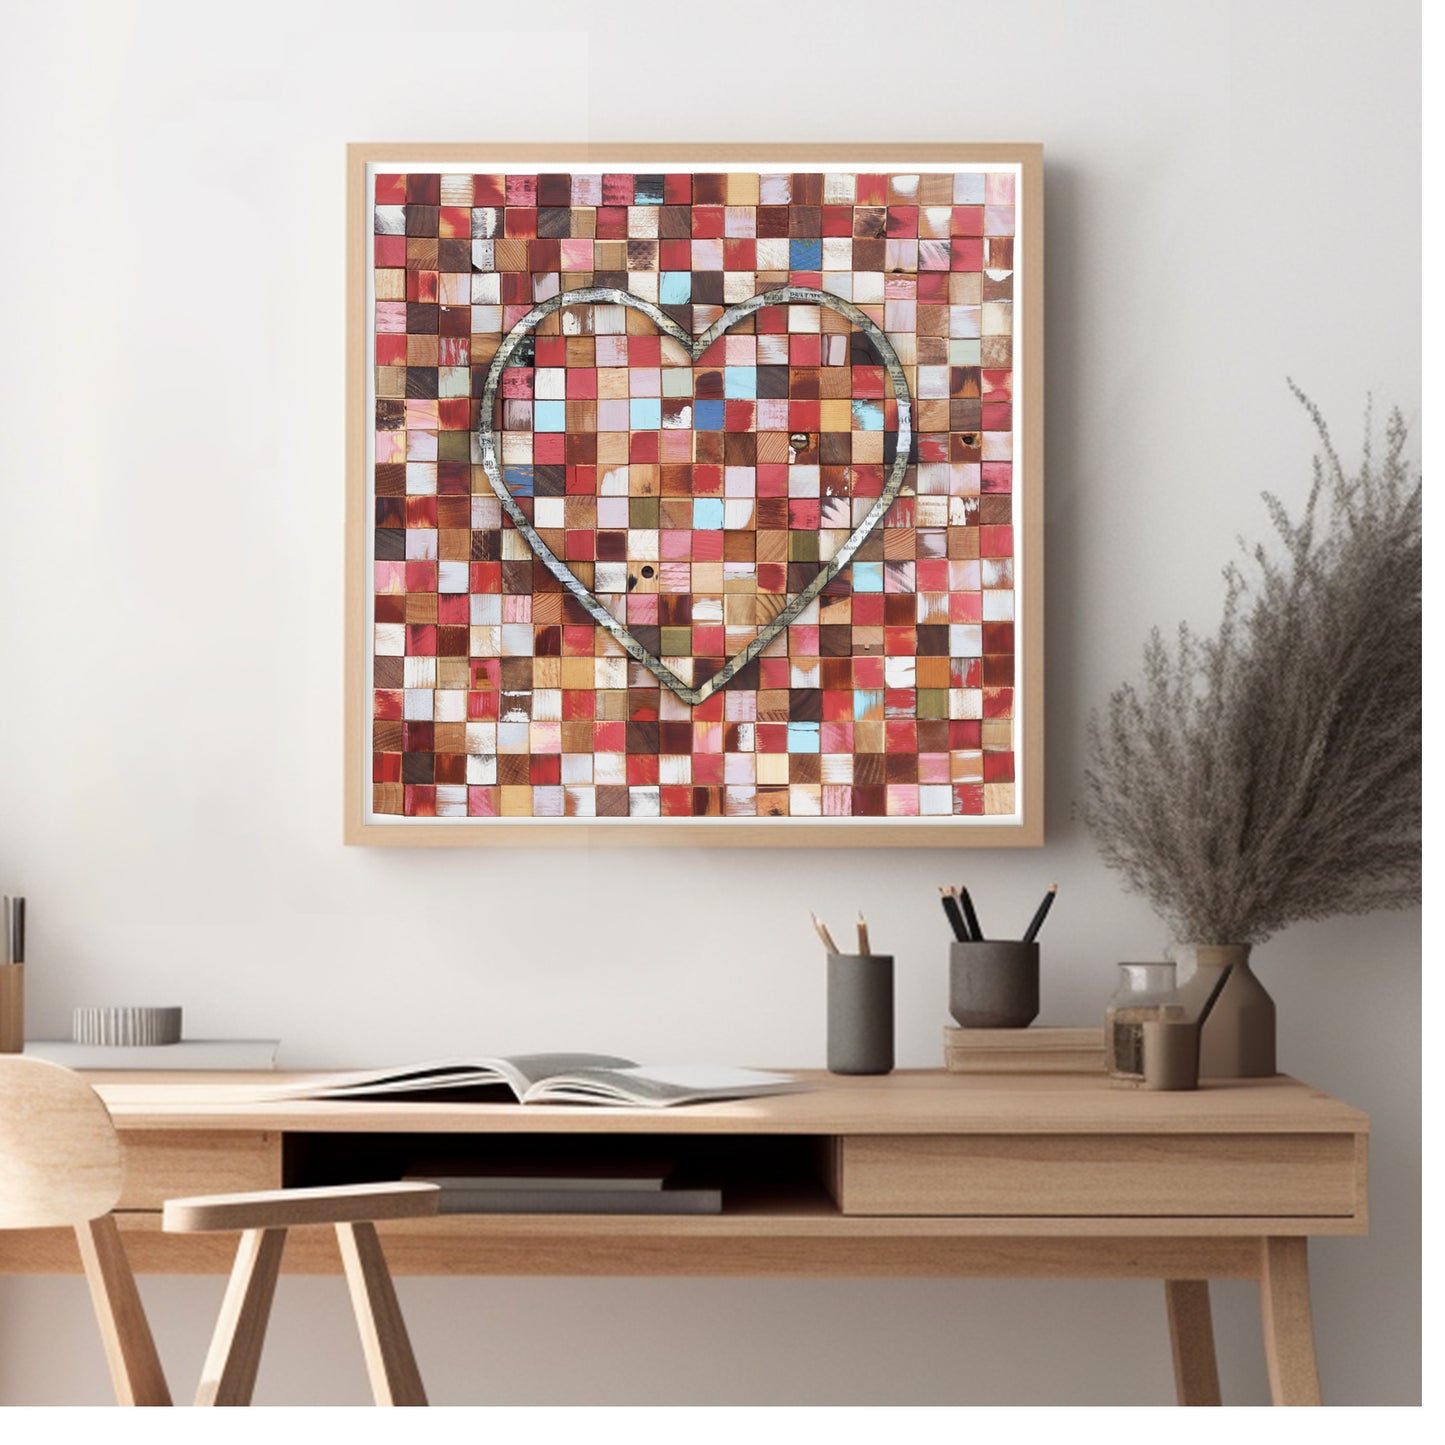 New Song In My Heart Mosaic Art Prints